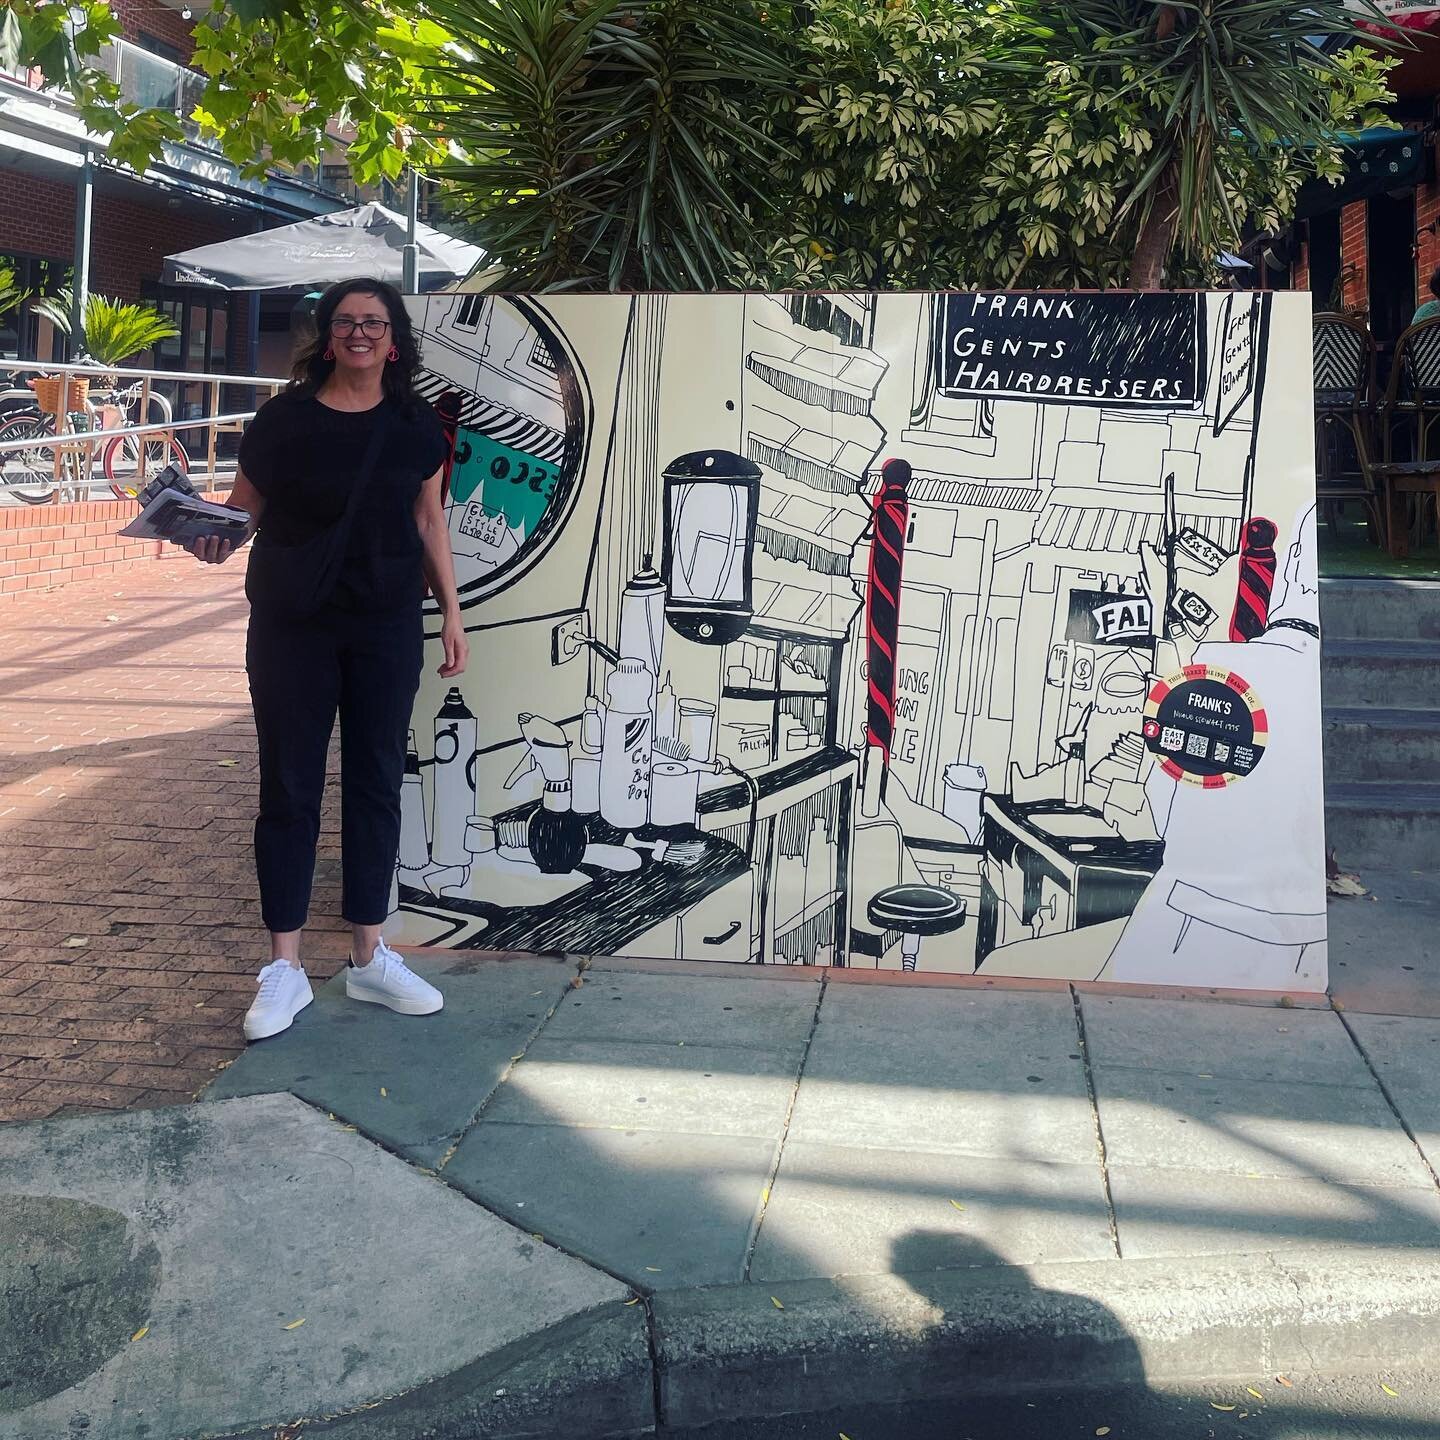 Launched!!
Thanks to all the fellow-trailers on Sunday arvo, we had a lovely wander through sunny streets, remembering the good &lsquo;ol days.
I&rsquo;m stoked!! 
So the trail is up and running, go and have a wander 🌞
Thanks team @rundlesteast @cit